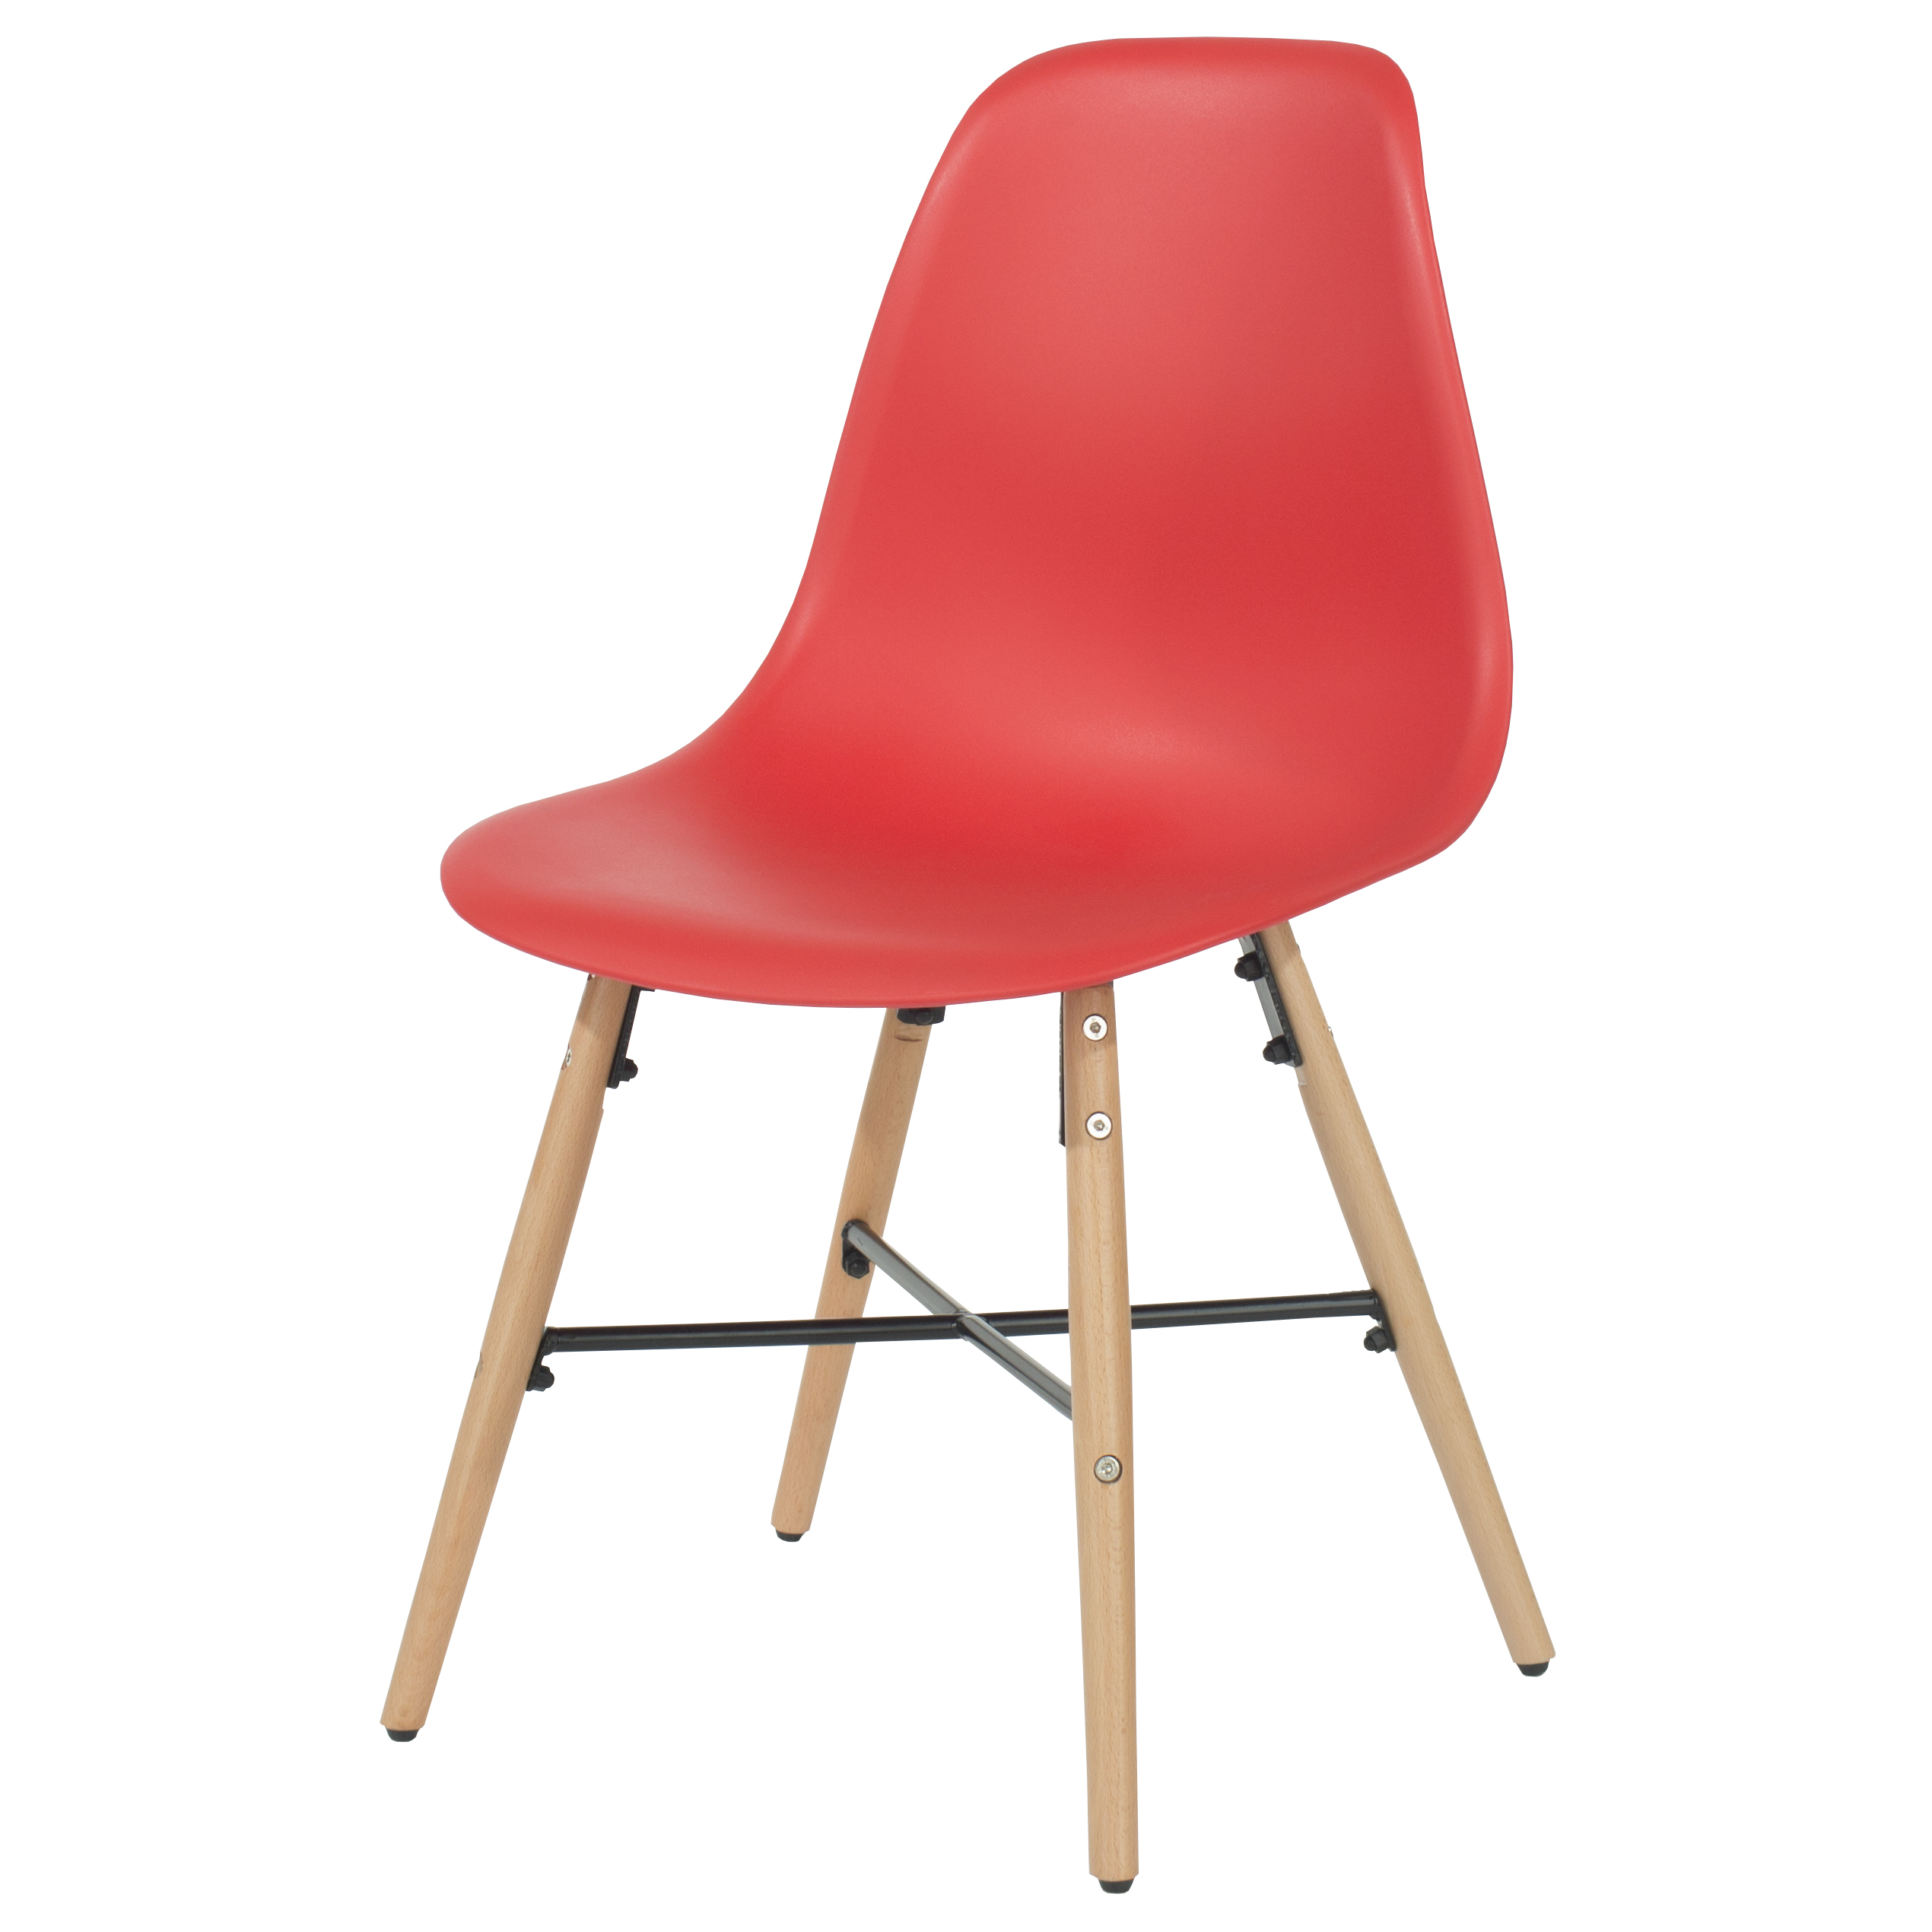 Penny red plastic chairs with wood legs & metal cross rails (pair)